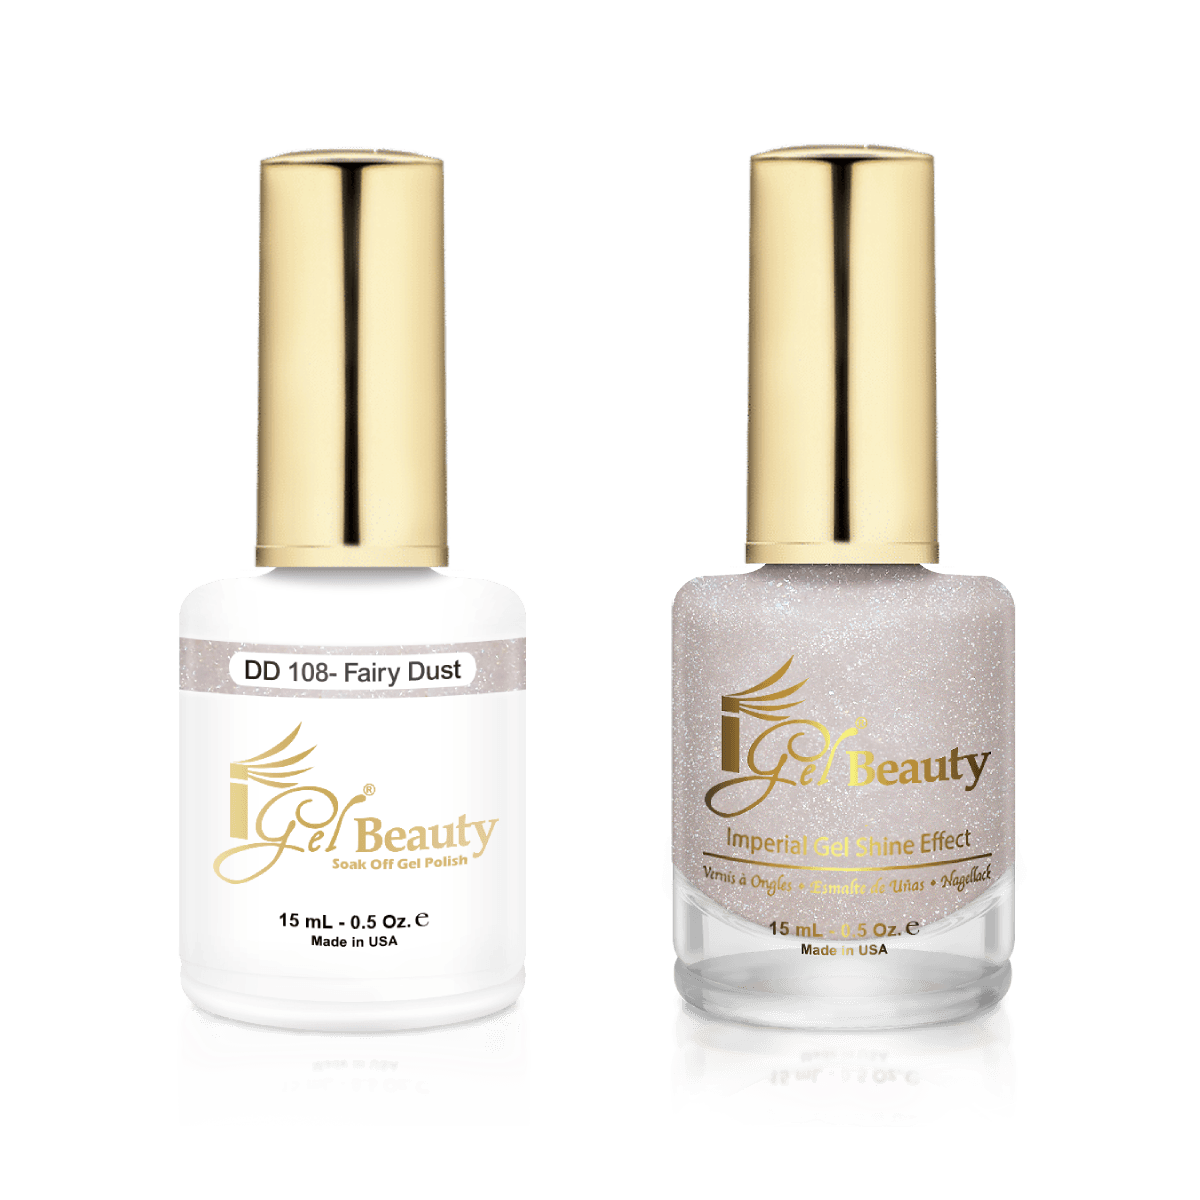 IGel Duo Gel Polish + Matching Nail Lacquer DD 108 FAIRY DUST